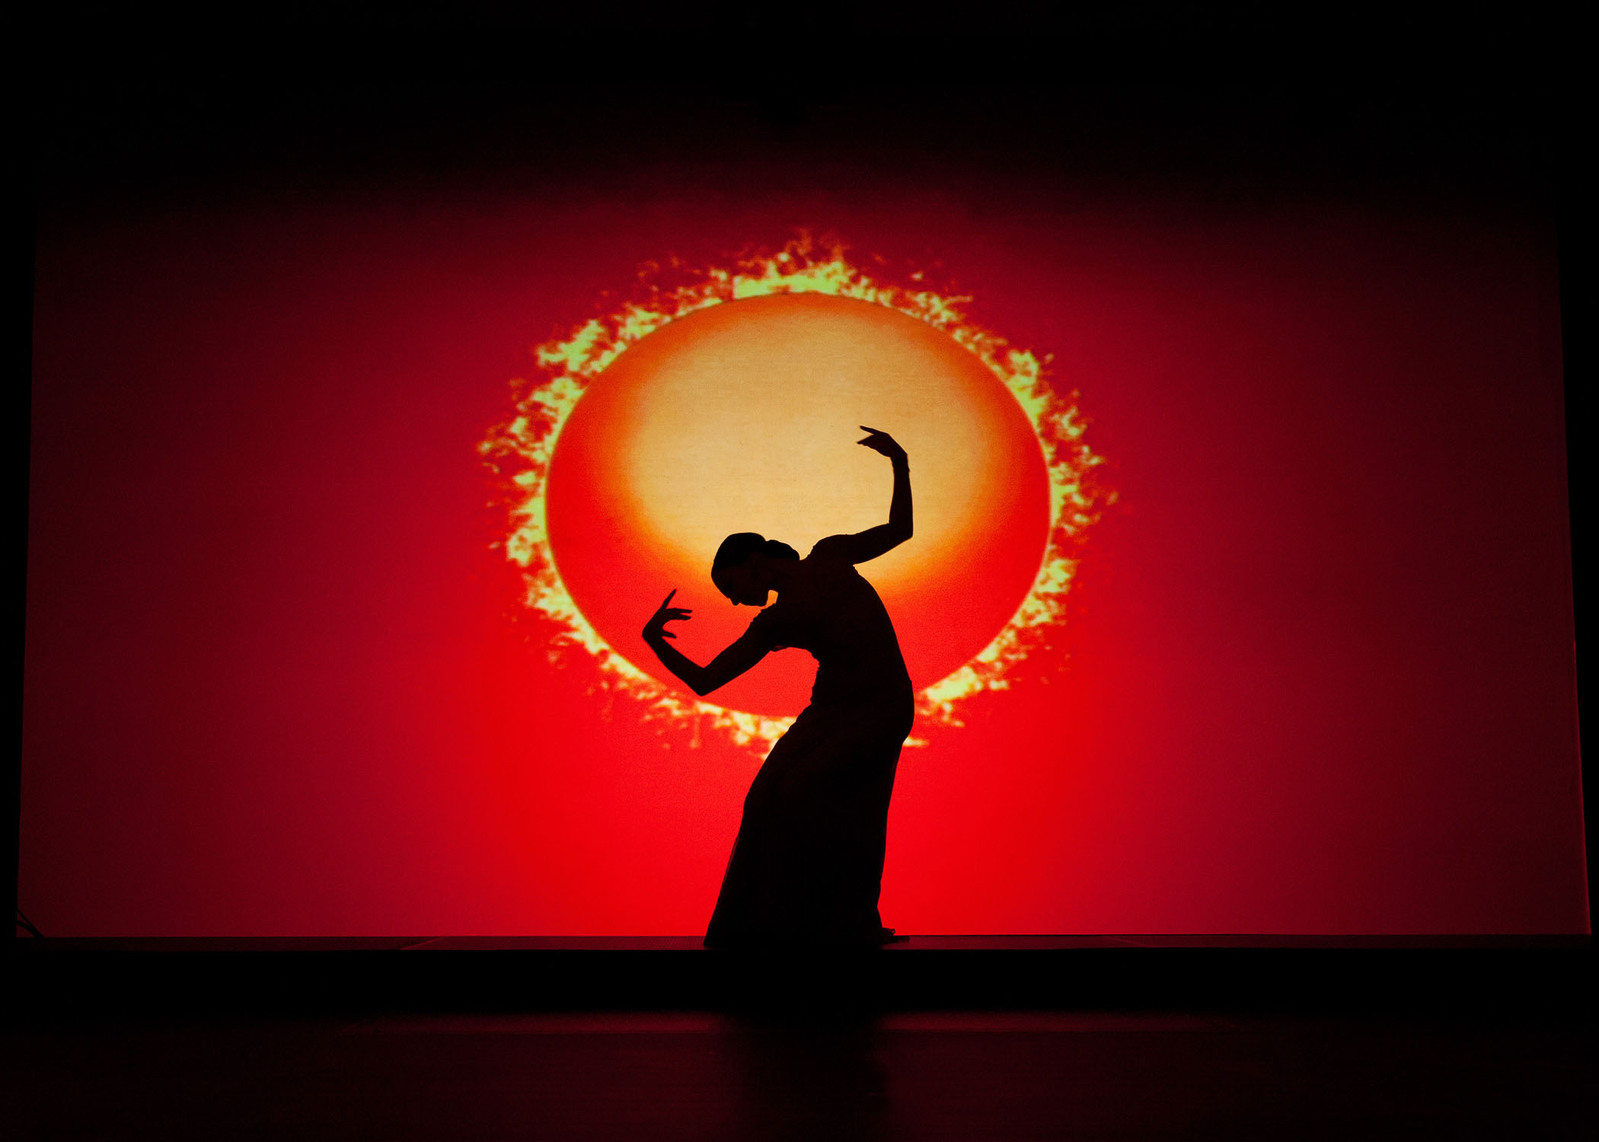 Live Event Photographer Spanish flamenco dancer on stage in the 3Arena Dublin with red background